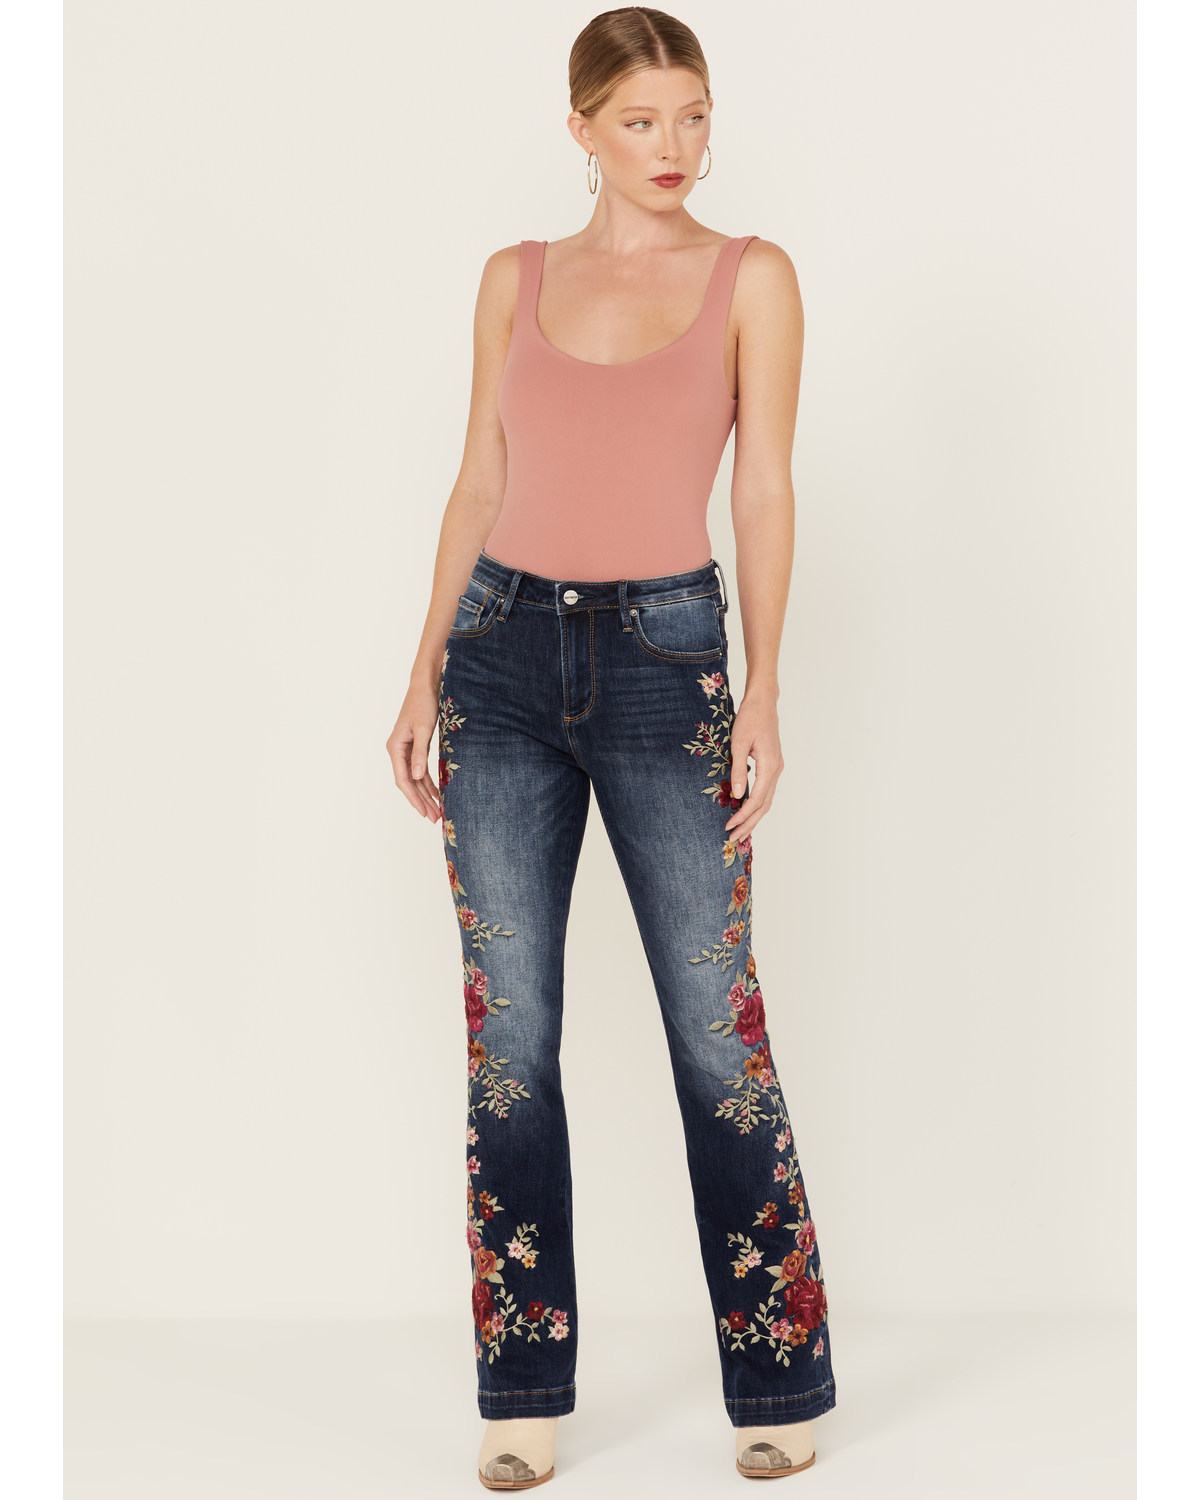 Driftwood Women's Medium Wash High Rise Floral Embroidered Stretch Flare Jeans